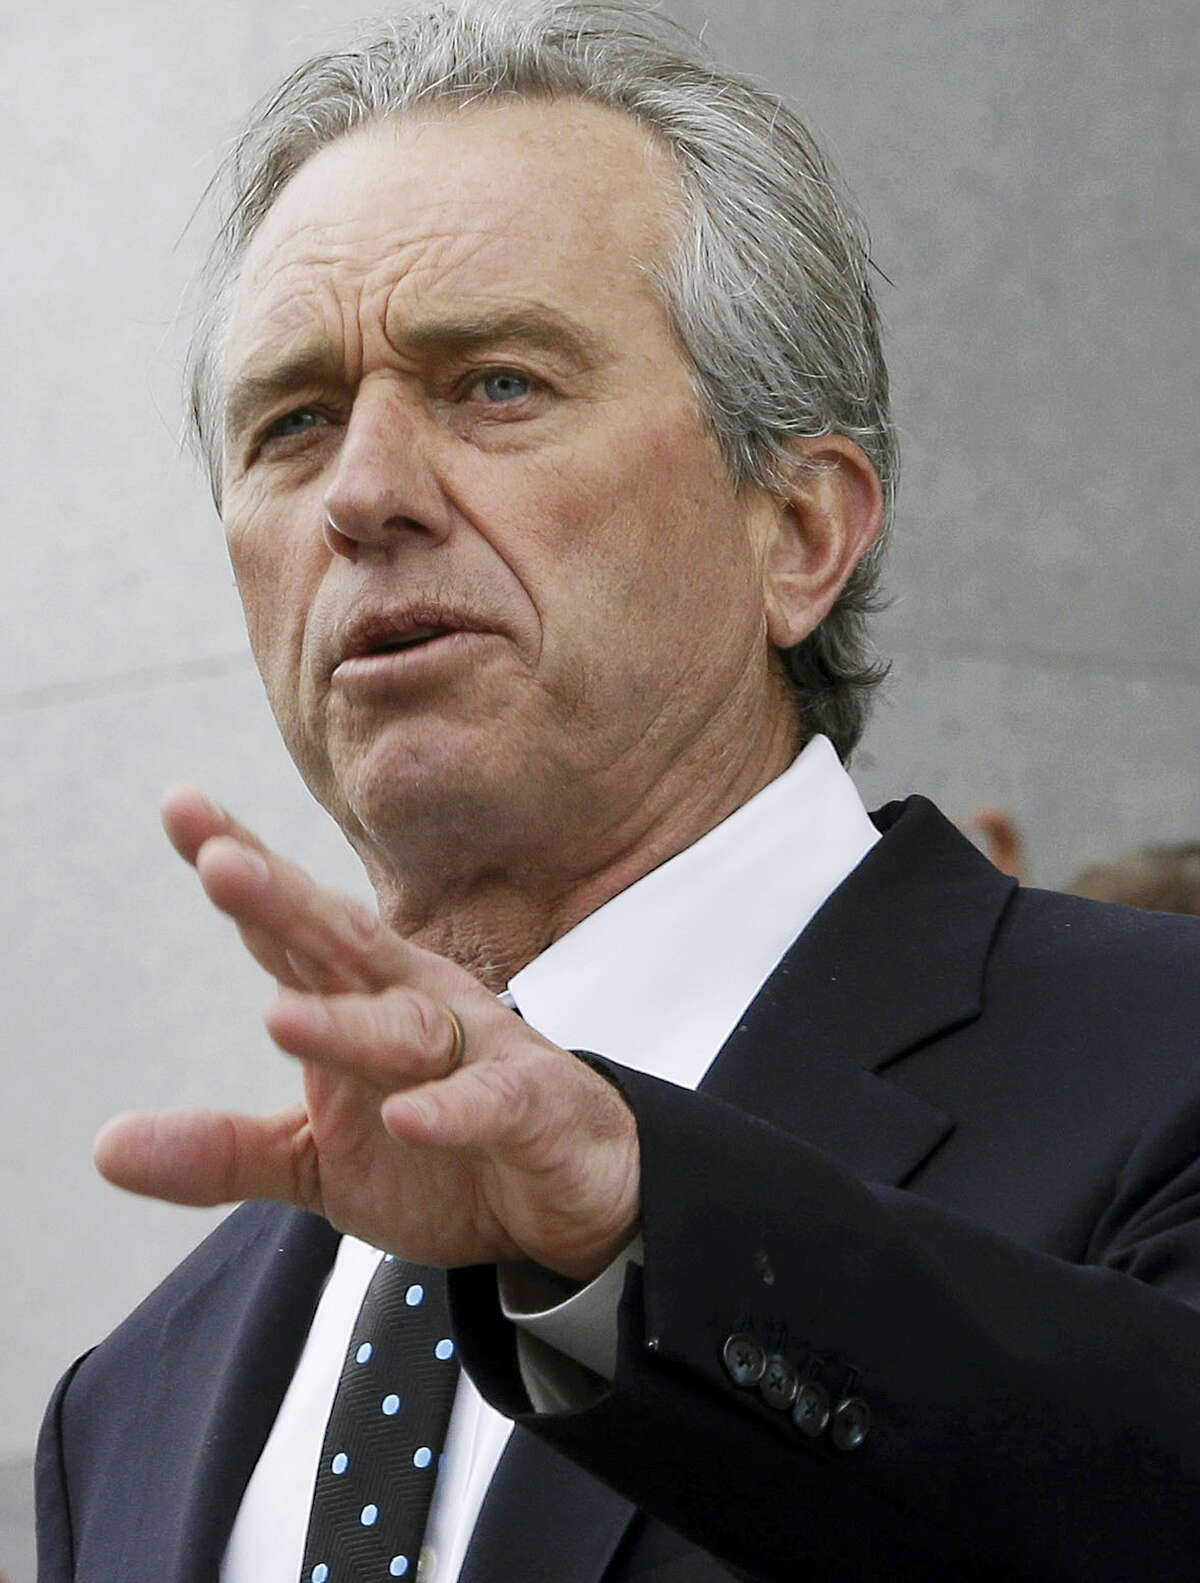 Robert Kennedy Jr., son of former U.S. Attorney Gen. Robert Kennedy, speaks last year during a rally at the Capitol in Sacramento, Calif. In a new book released Tuesday, July 12, 2016, Kennedy argues that his cousin Michael Skakel is innocent of murdering his neighbor Martha Moxley in 1975 when they both were 15. Skakel was convicted in 2002 and sentenced to 20 years to life in prison.